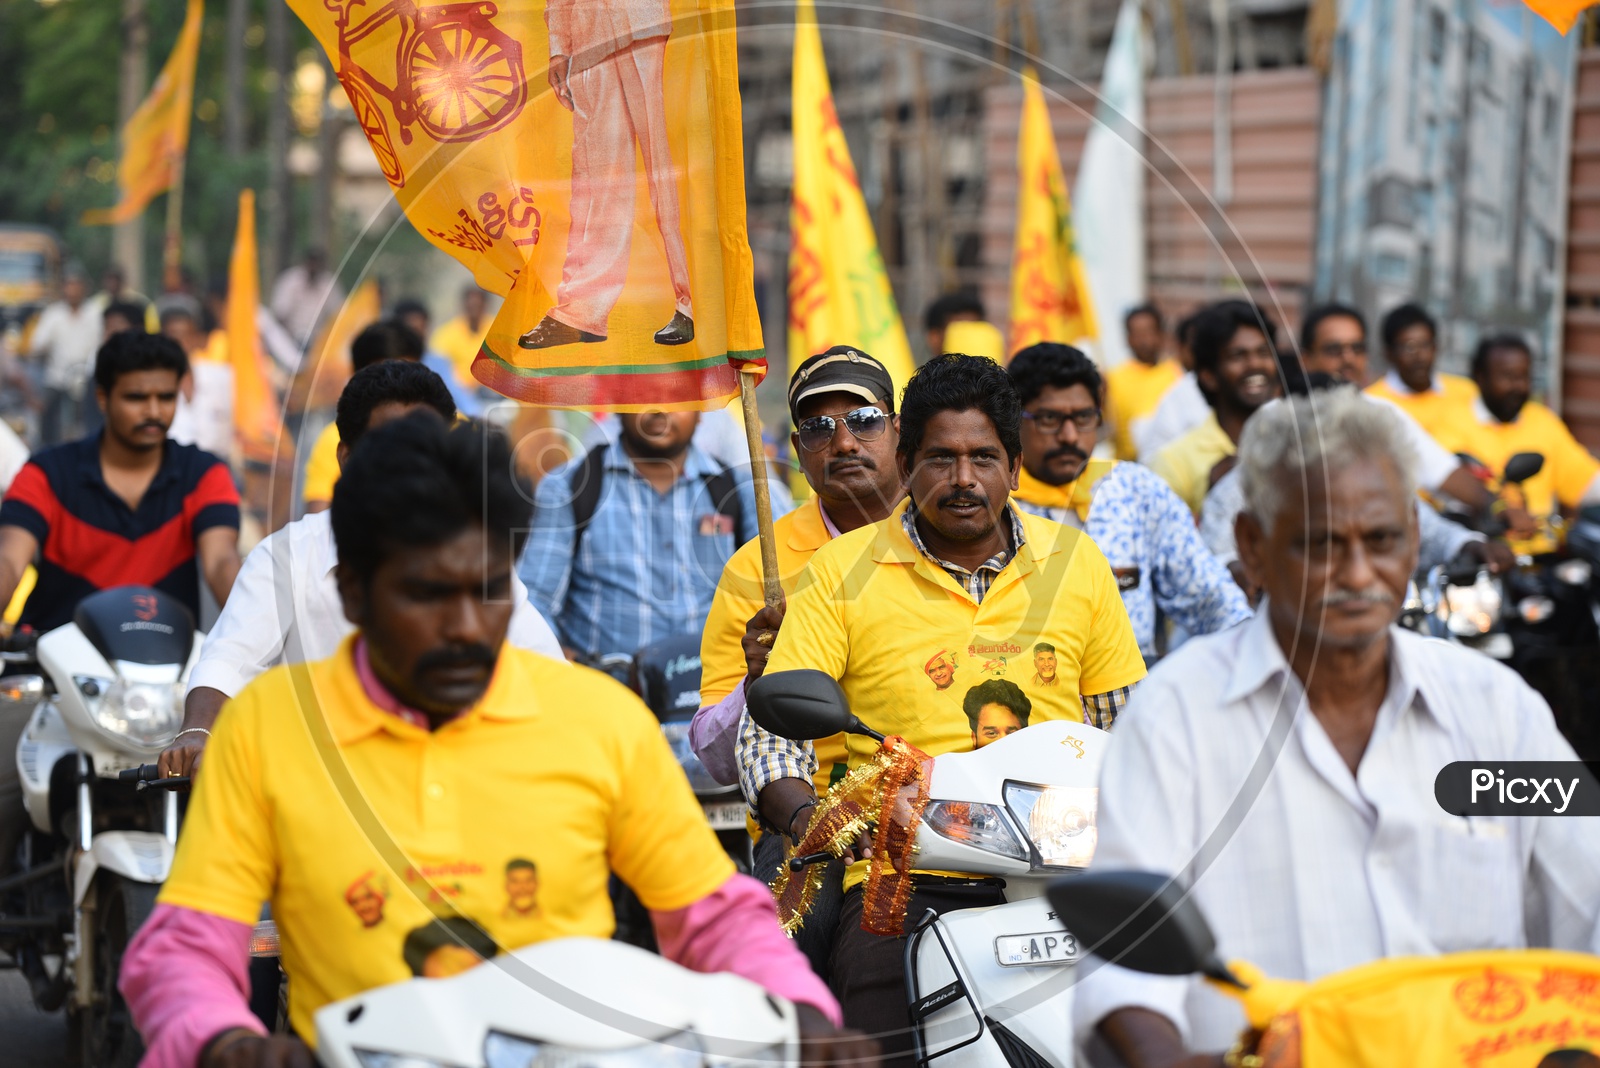 TDP party supporters wearing party t-shirts and riding bikes during an election campaign rally in Amalapuram